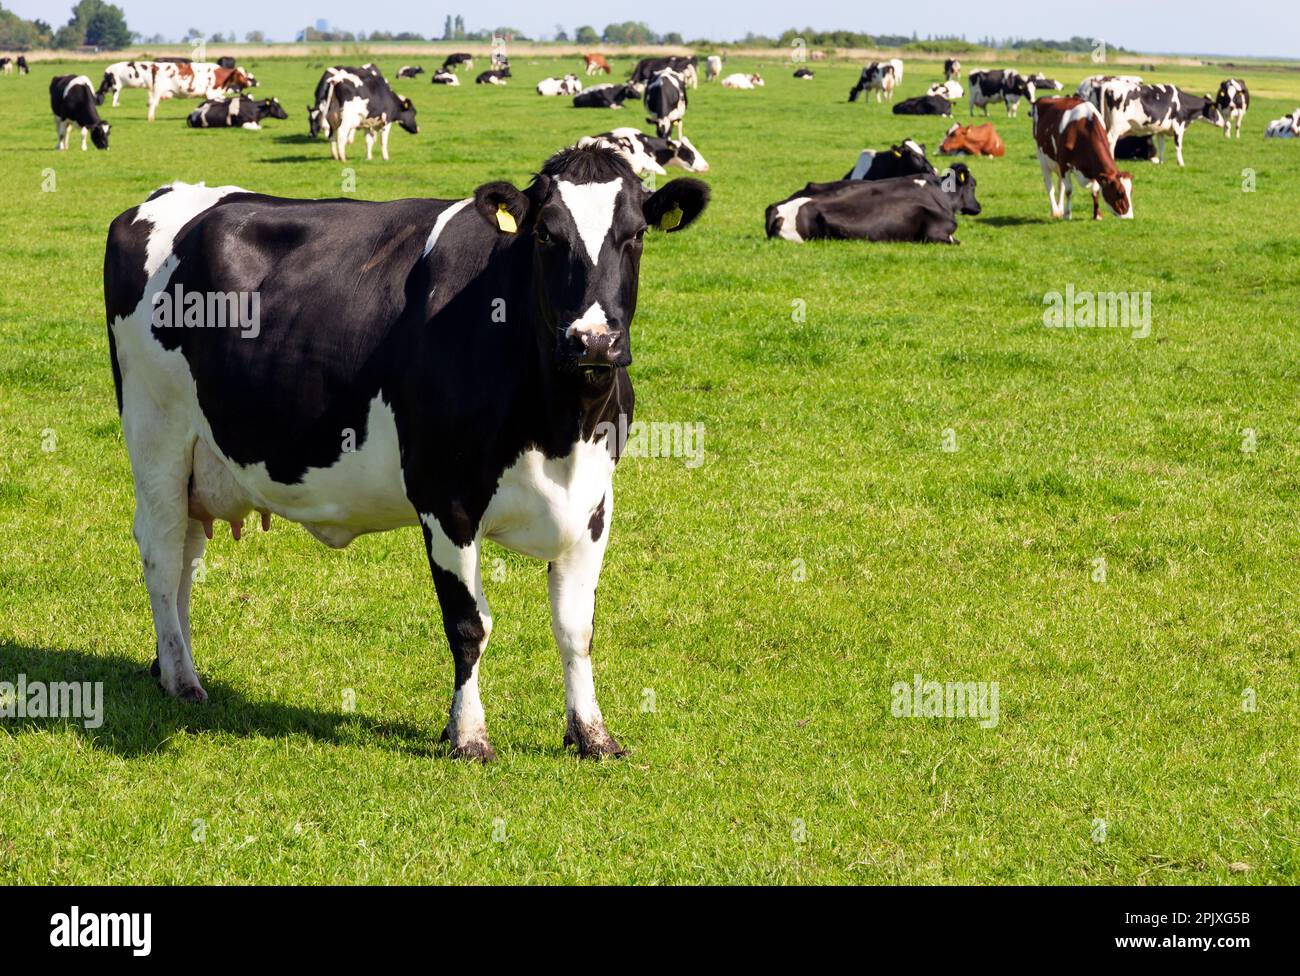 Black and white Holstein Friesian cattle cows grazing on farmland. Stock Photo